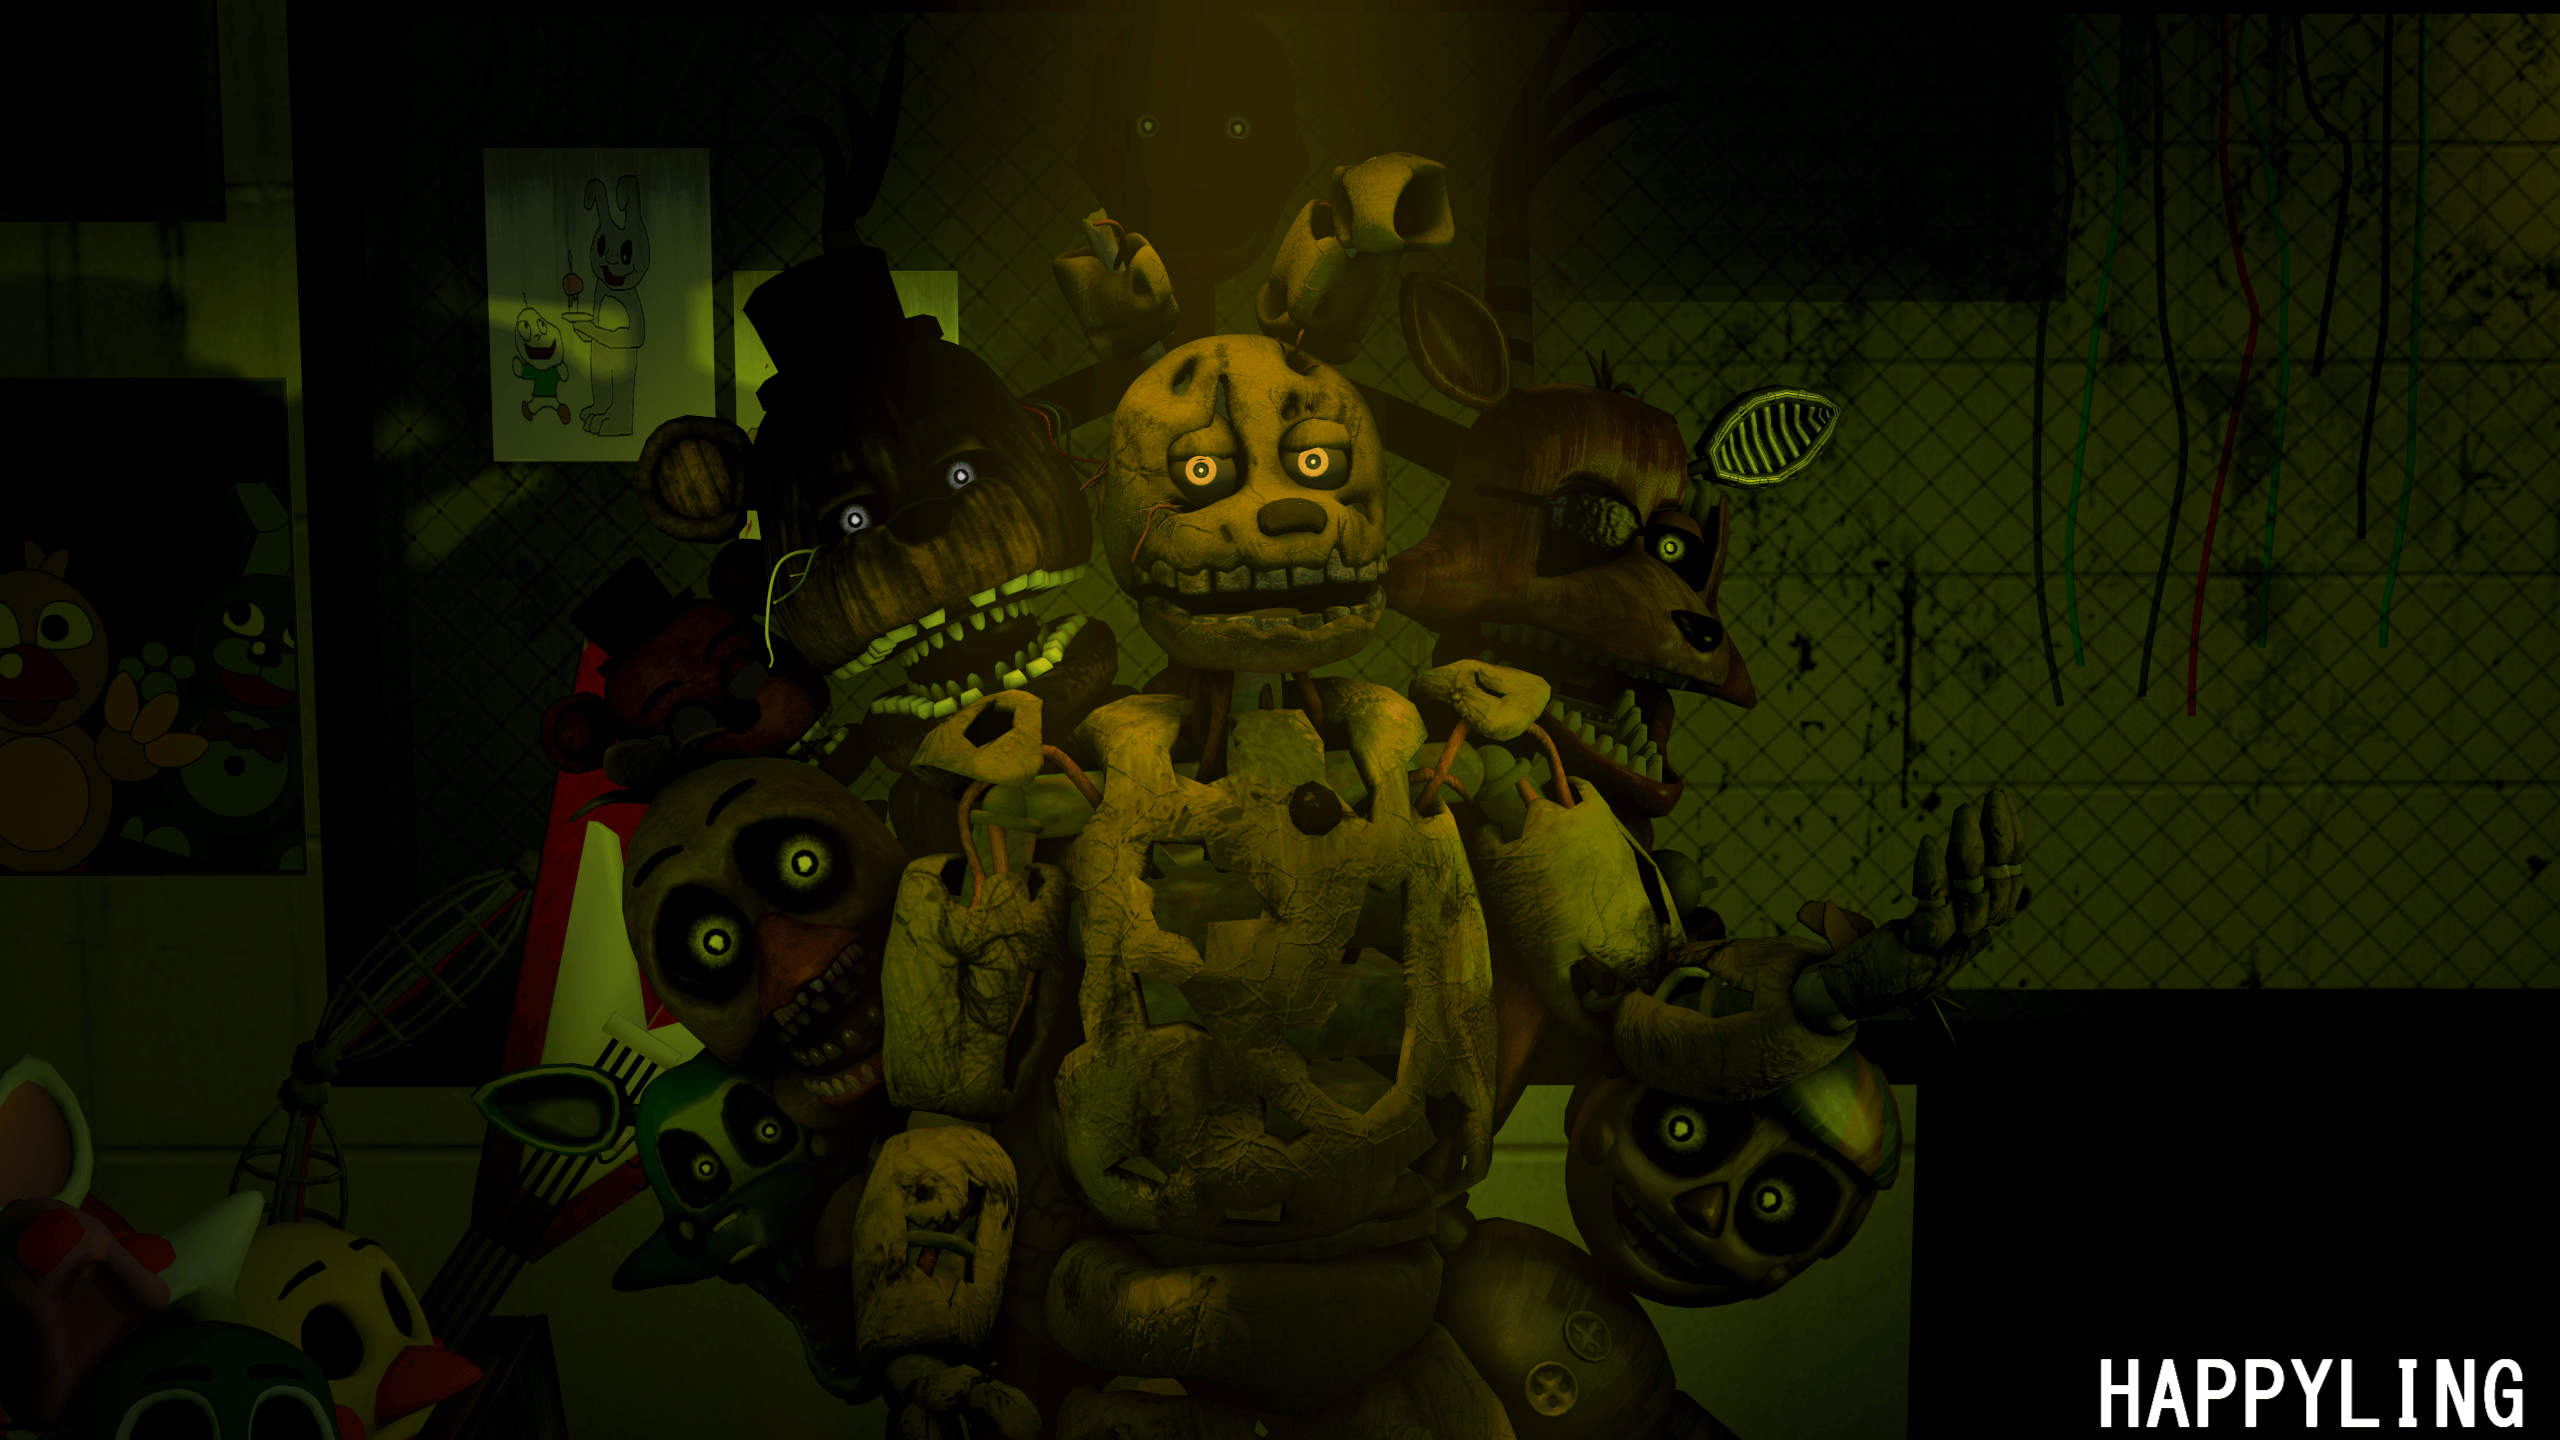 Video Game Five Nights at Freddy's 3 4k Ultra HD Wallpaper